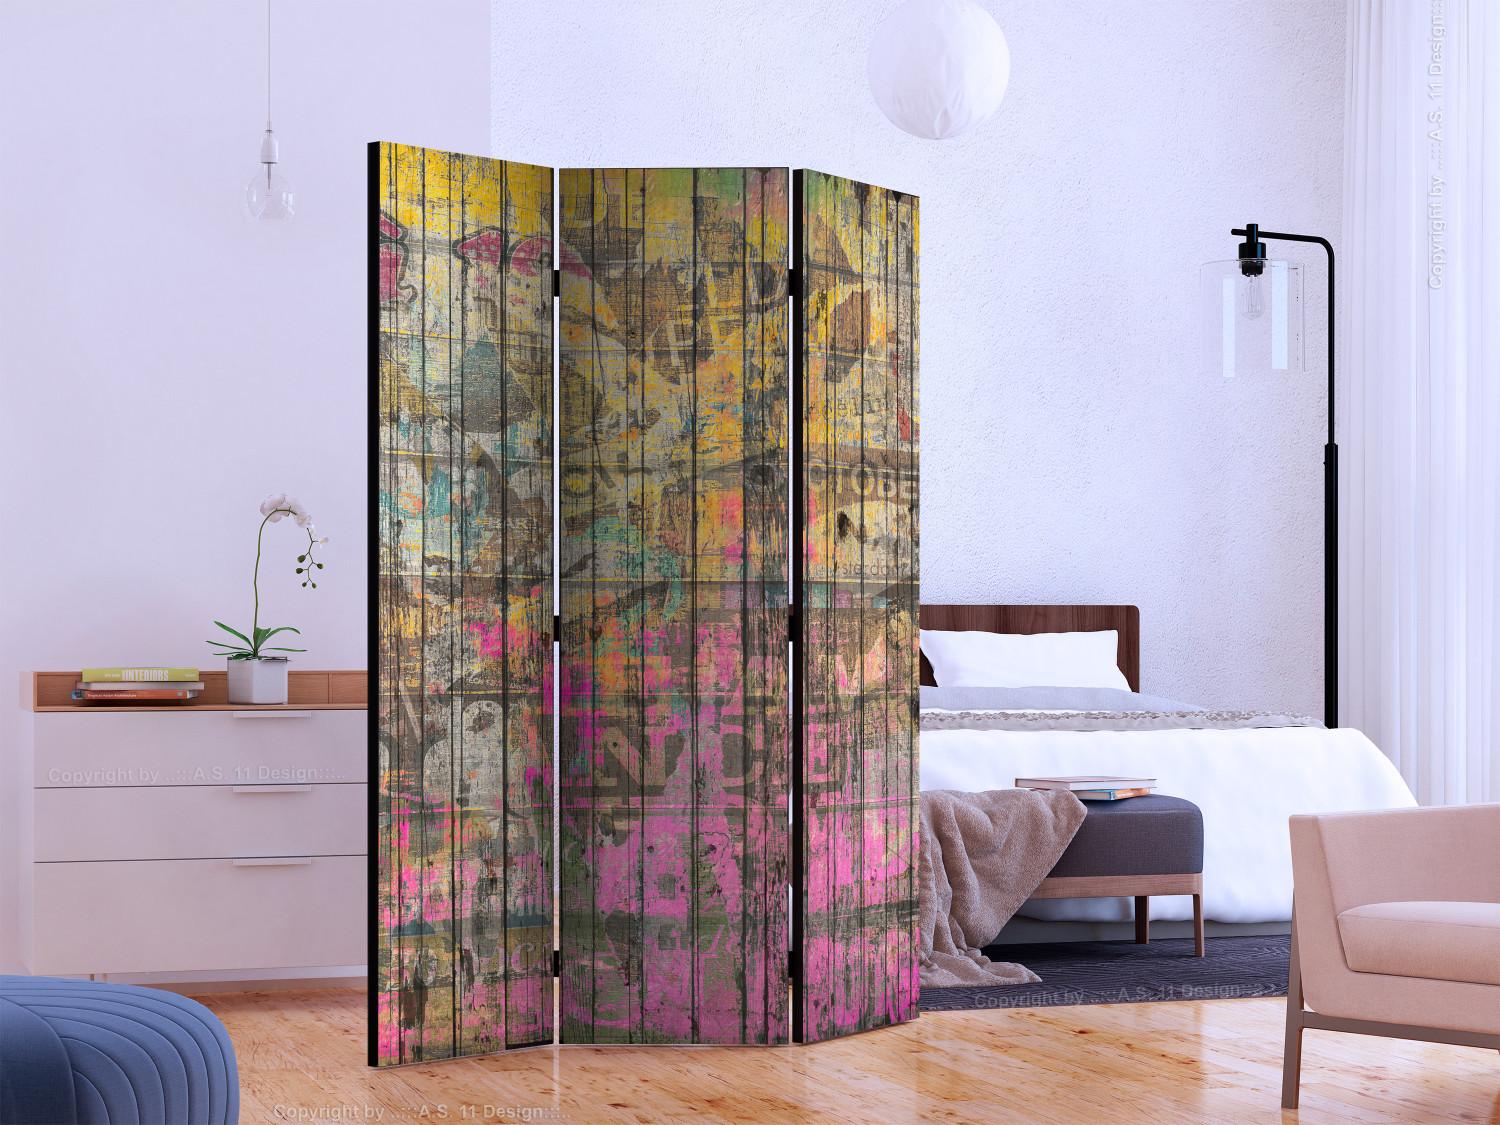 Room Divider Freestyle - texture with colorful and abstract graffiti-style patterns